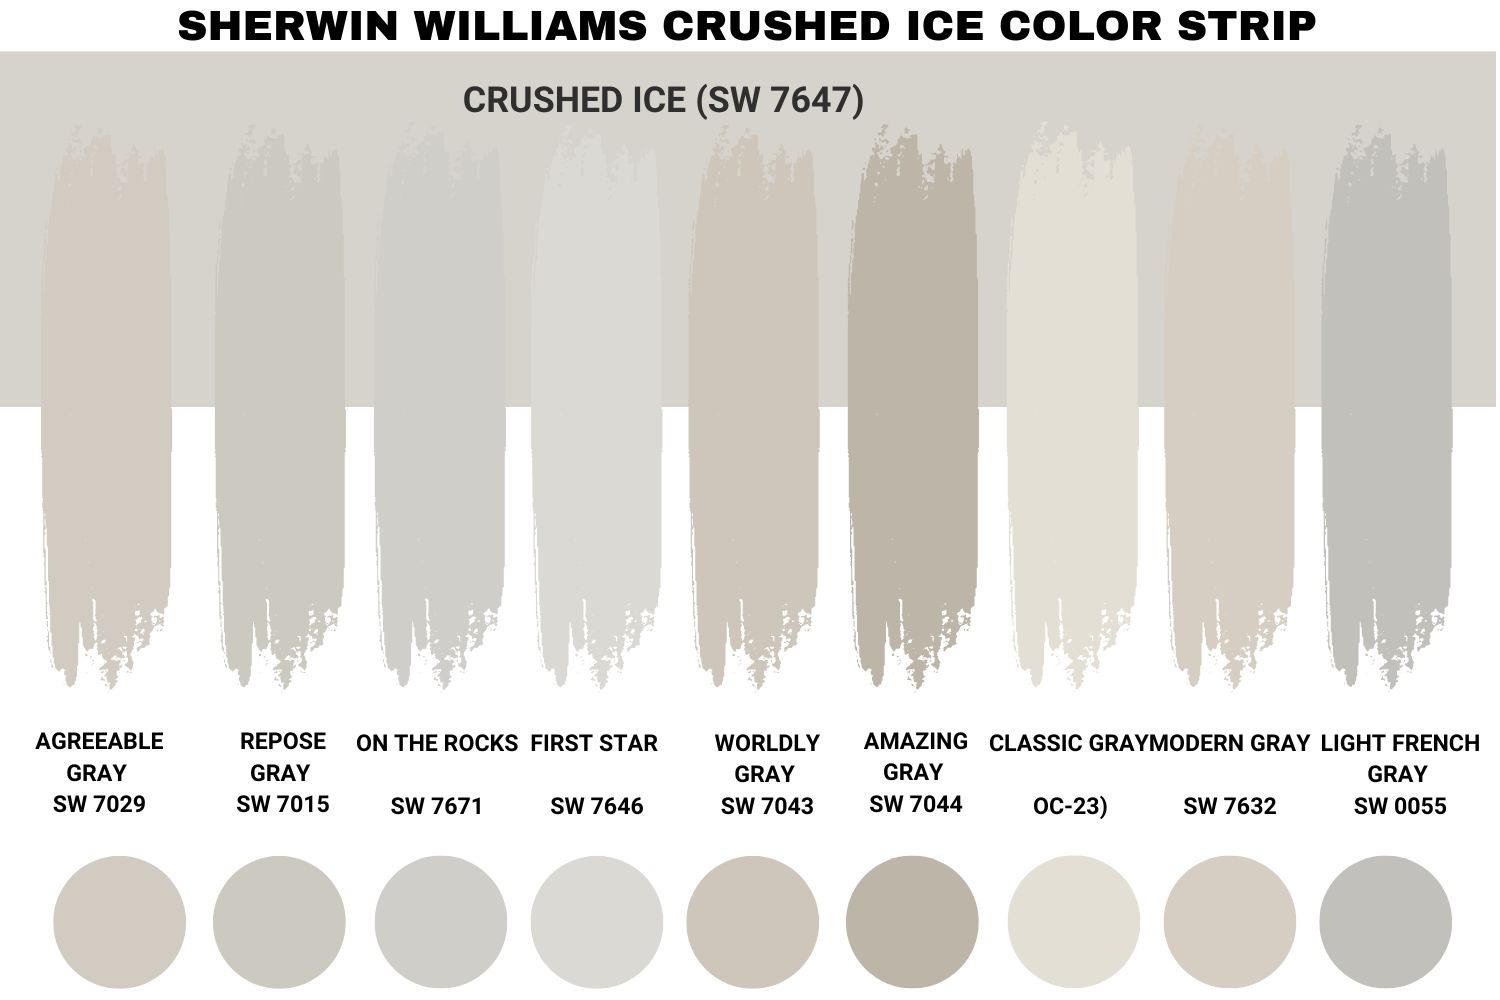 Sherwin Williams Crushed Ice Color Strip Sherwin Williams Crushed Ice Color Comparisons